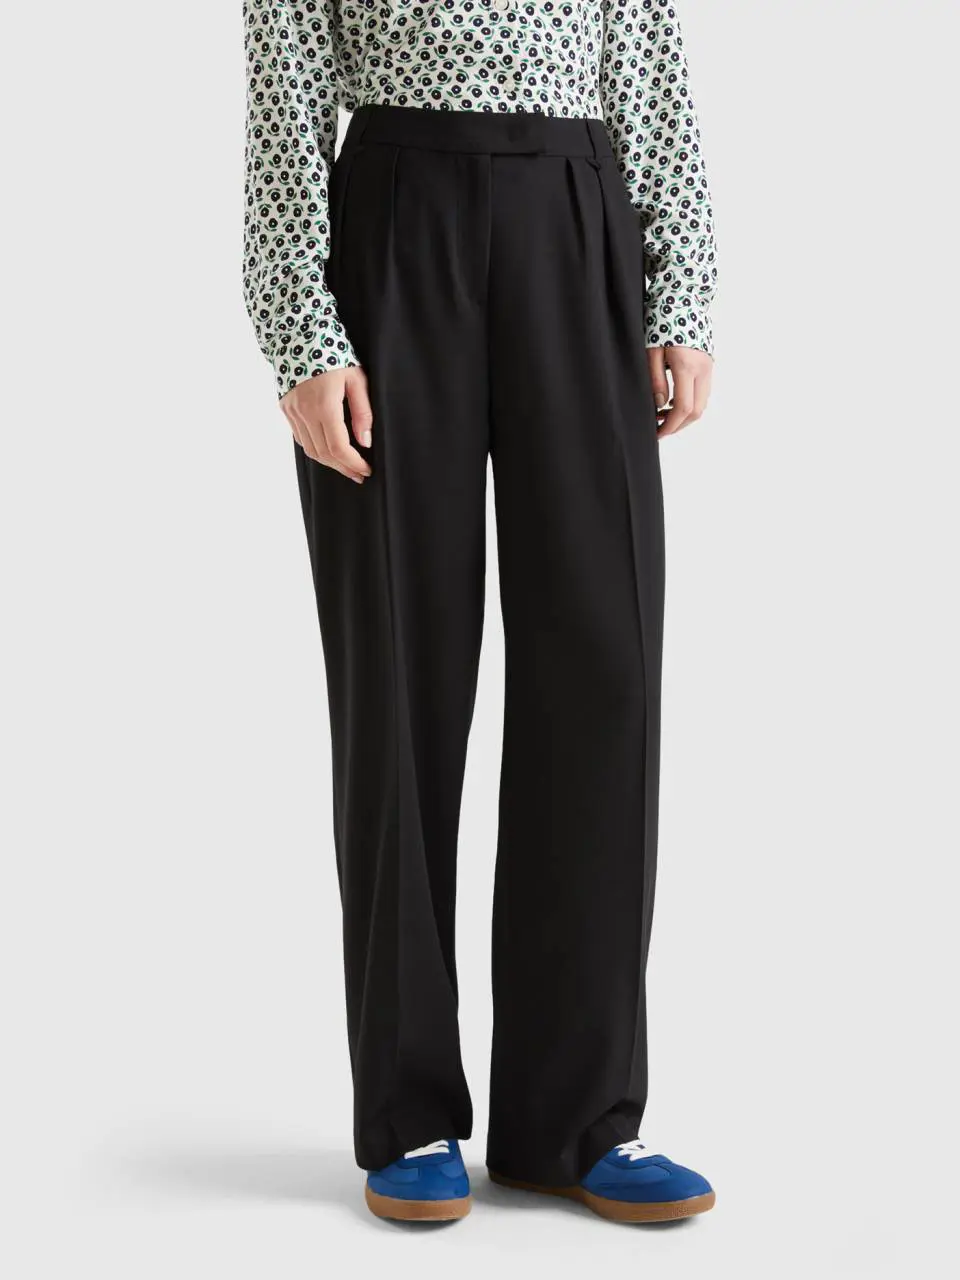 Benetton flowy trousers with double crease. 1